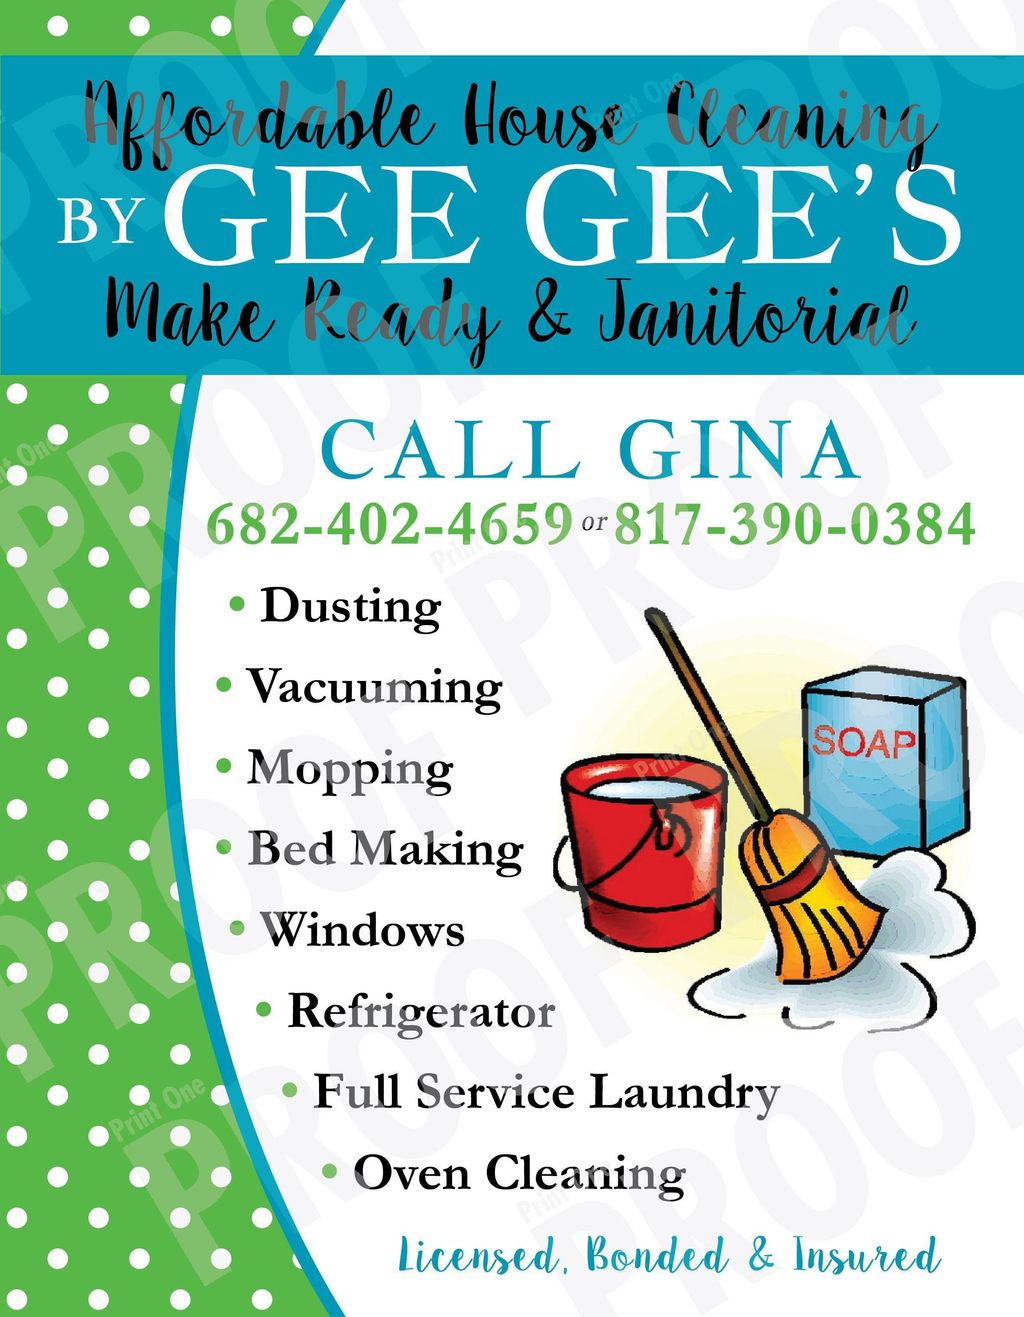 GeeGee's Make Ready & Janitorial